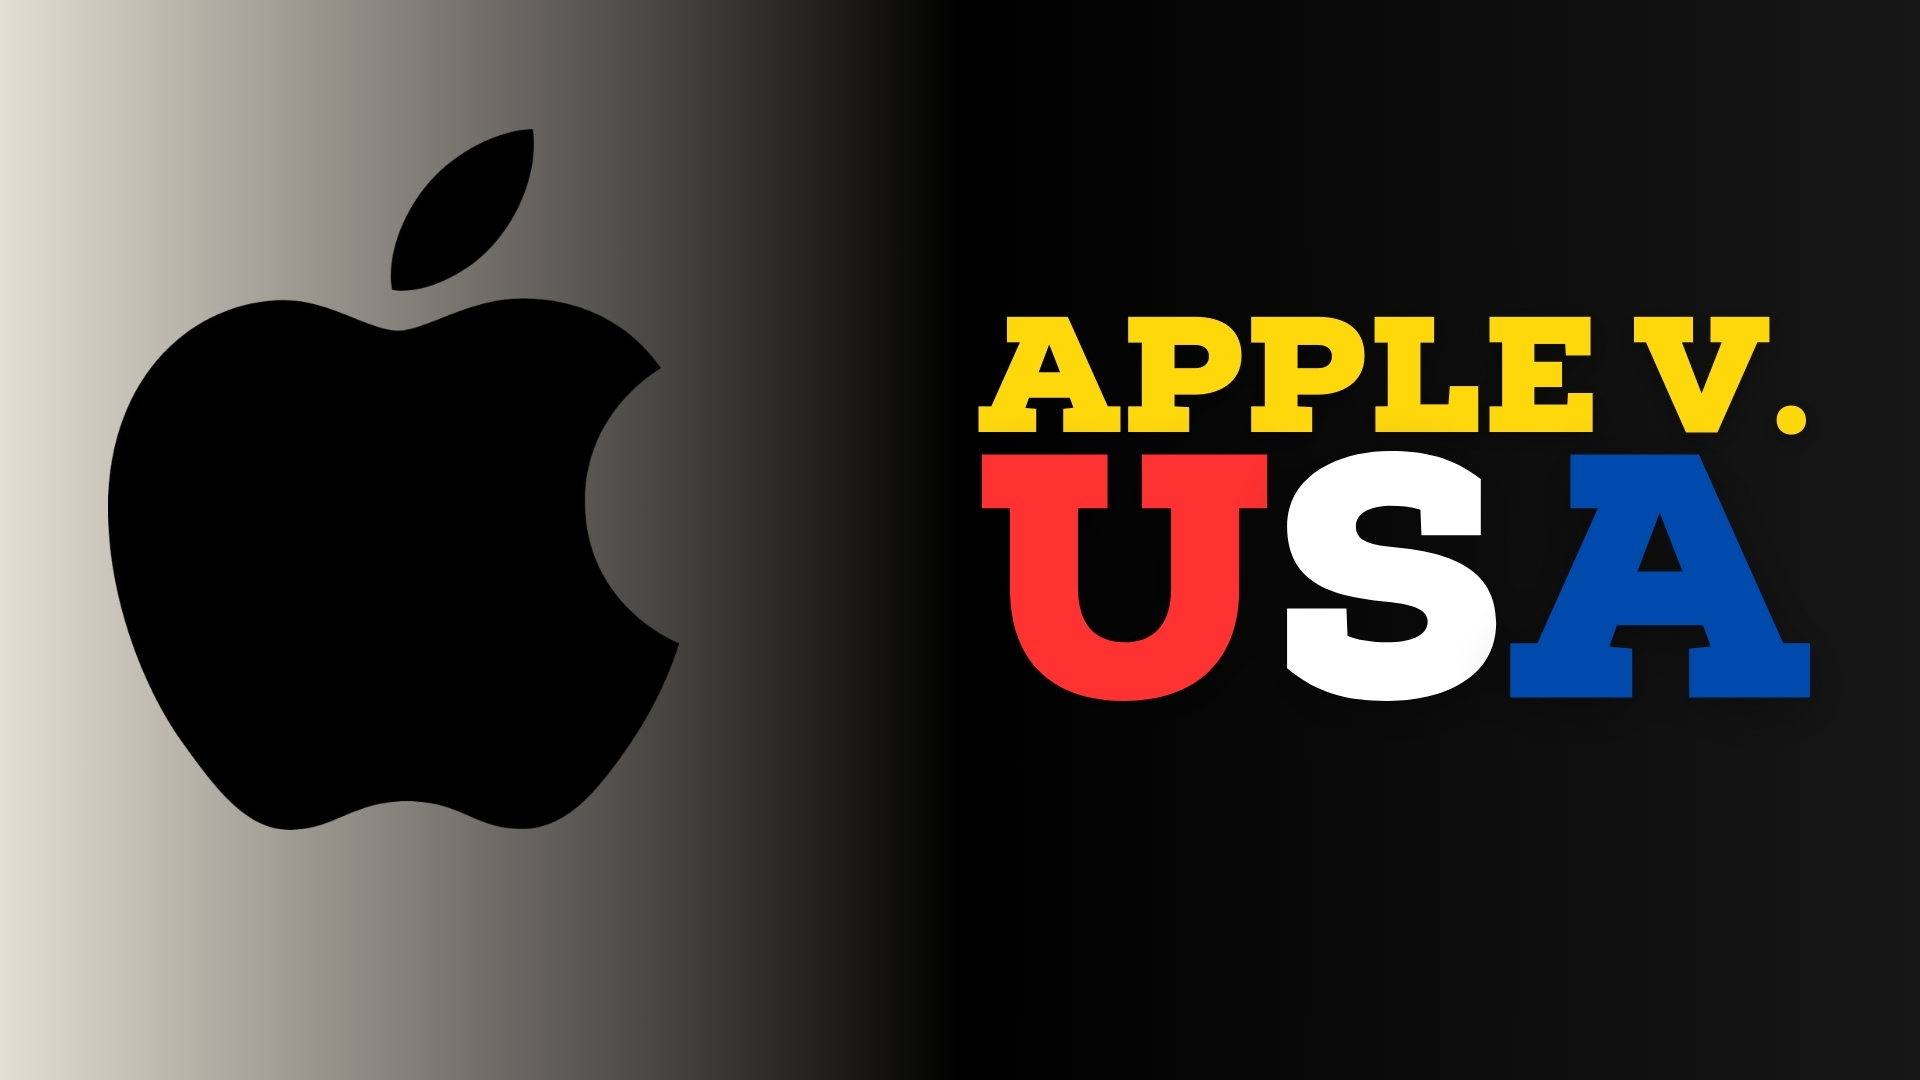 Apple USA landmark lawsuit with Apple logo on left and Apple v. USA on right